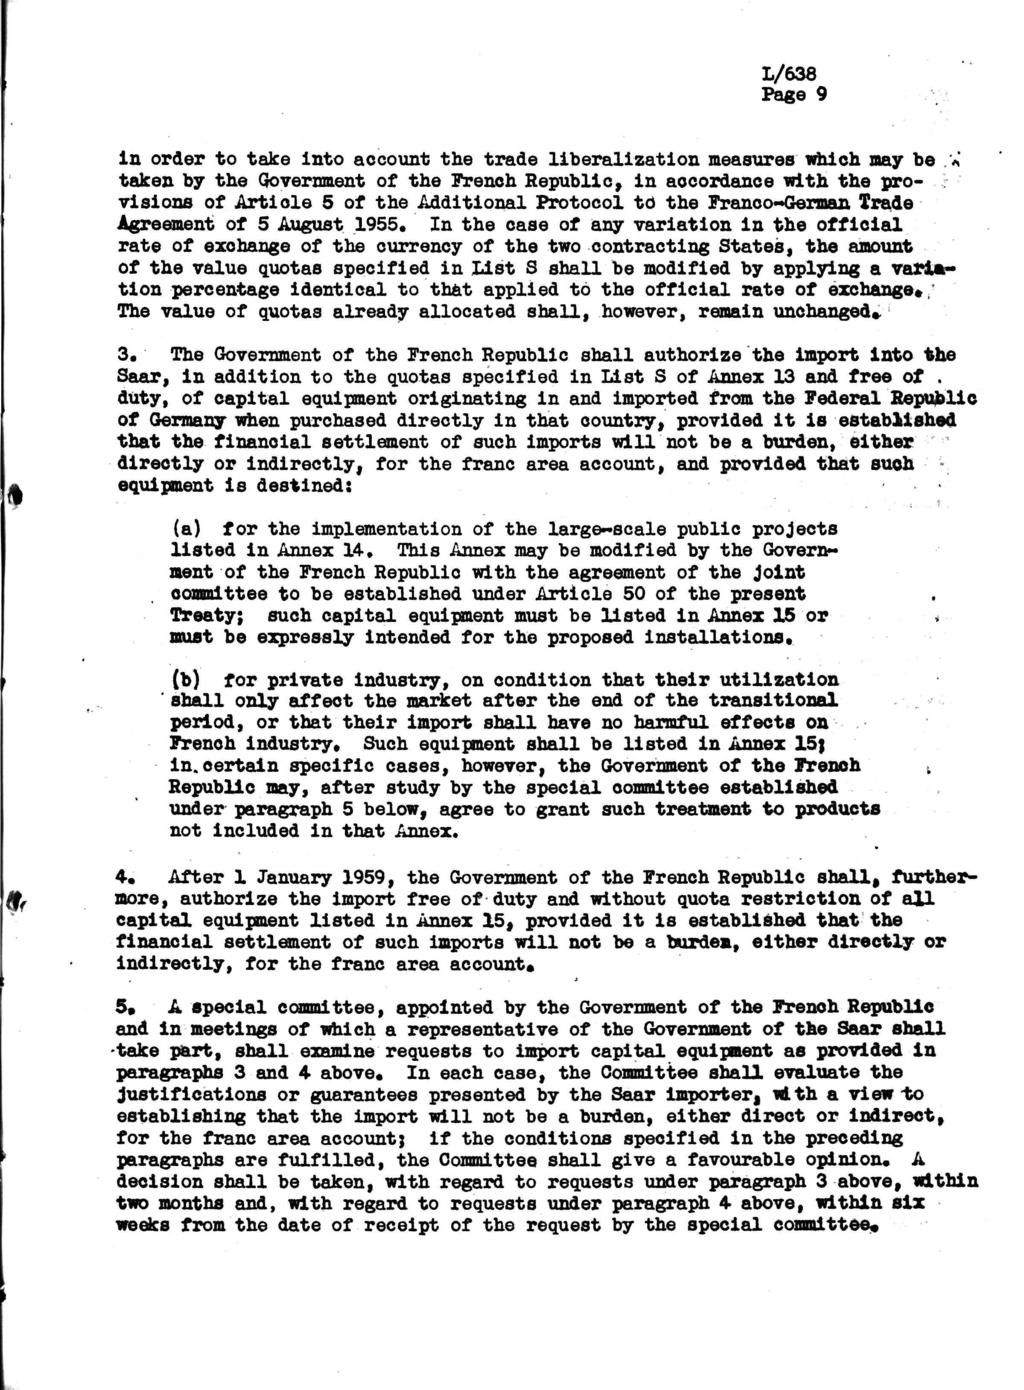 Page 9 in order to take into account the trade liberalization measures which nay be * taken by the Qovernment of the Trench Republic, in accordance with the pro- : visions of Article 5 of the